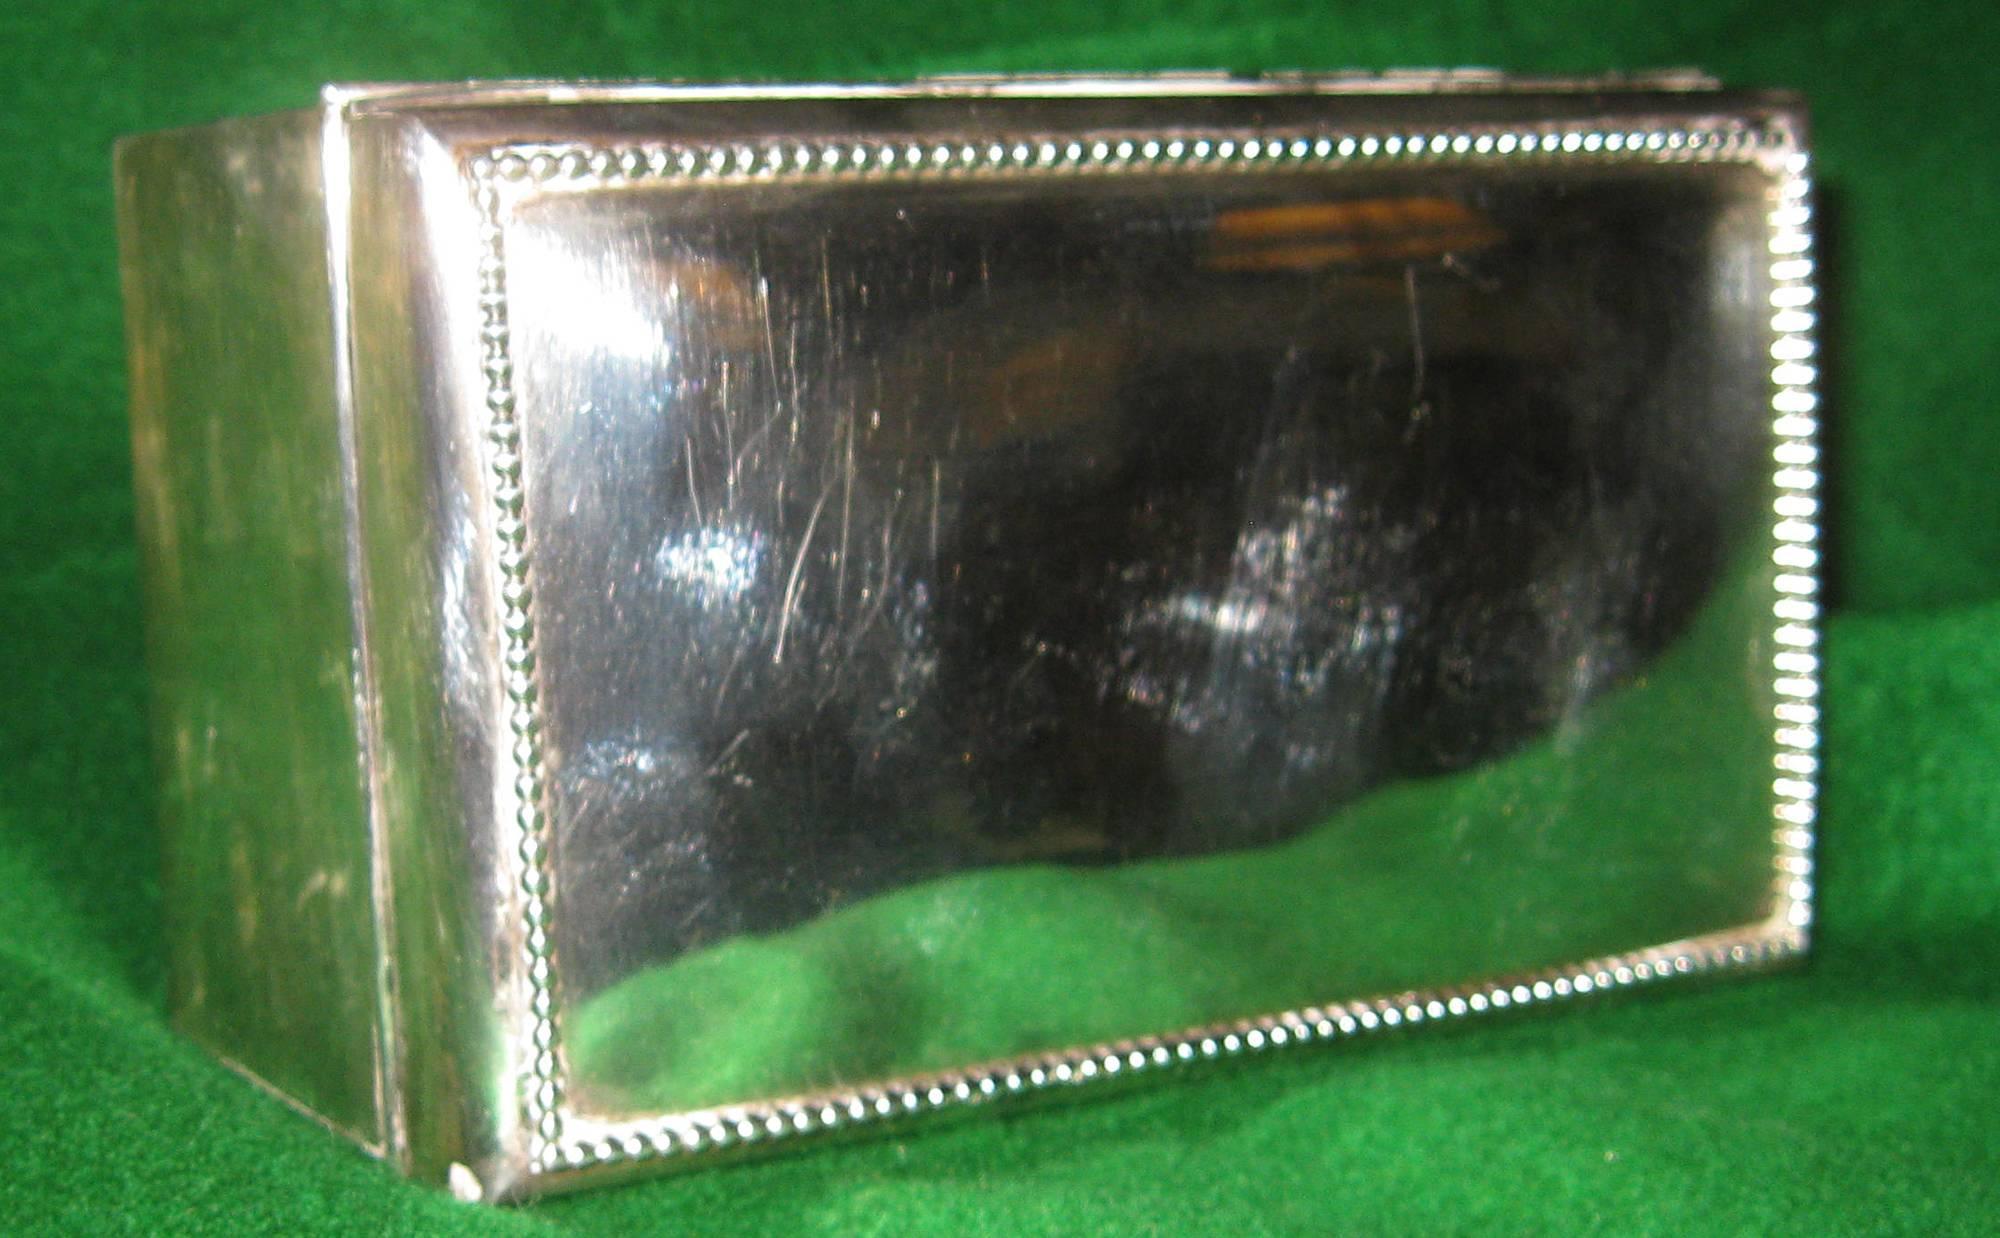 Sterling silver cigarette box marked Black, Starr and Frost who was America's first jeweler. Founded in 1810, this prestigious firm shaped the luxury revolution of the American jewelry industry. As America's oldest jewelry store, Black, Starr and